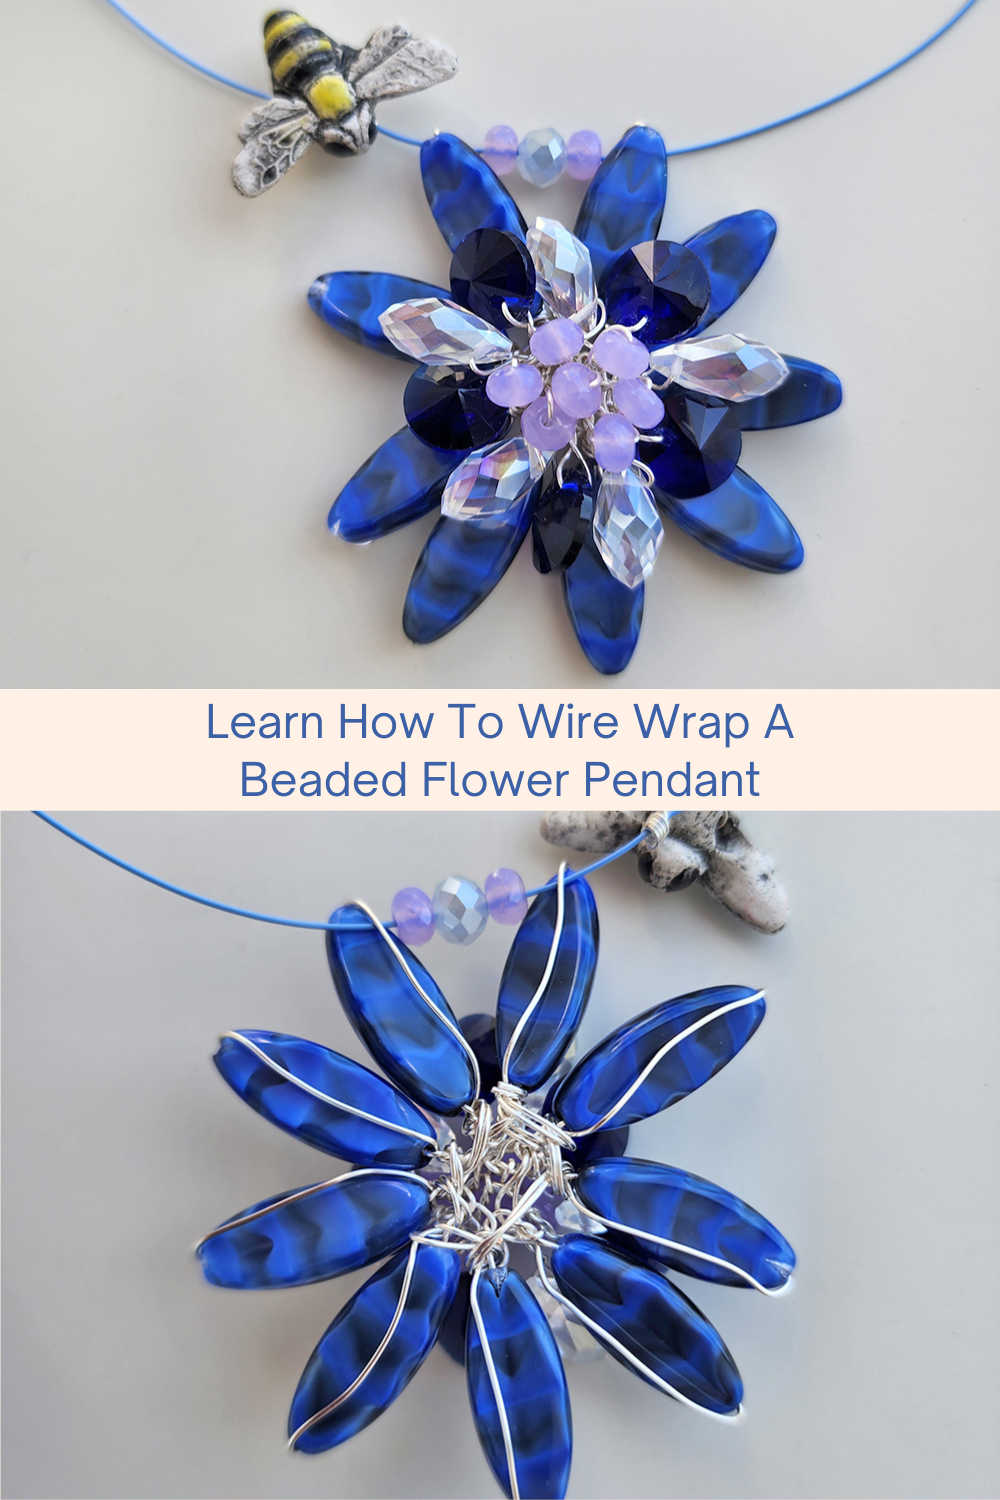 Learn How To Wire Wrap A Beaded Flower Pendant Collage